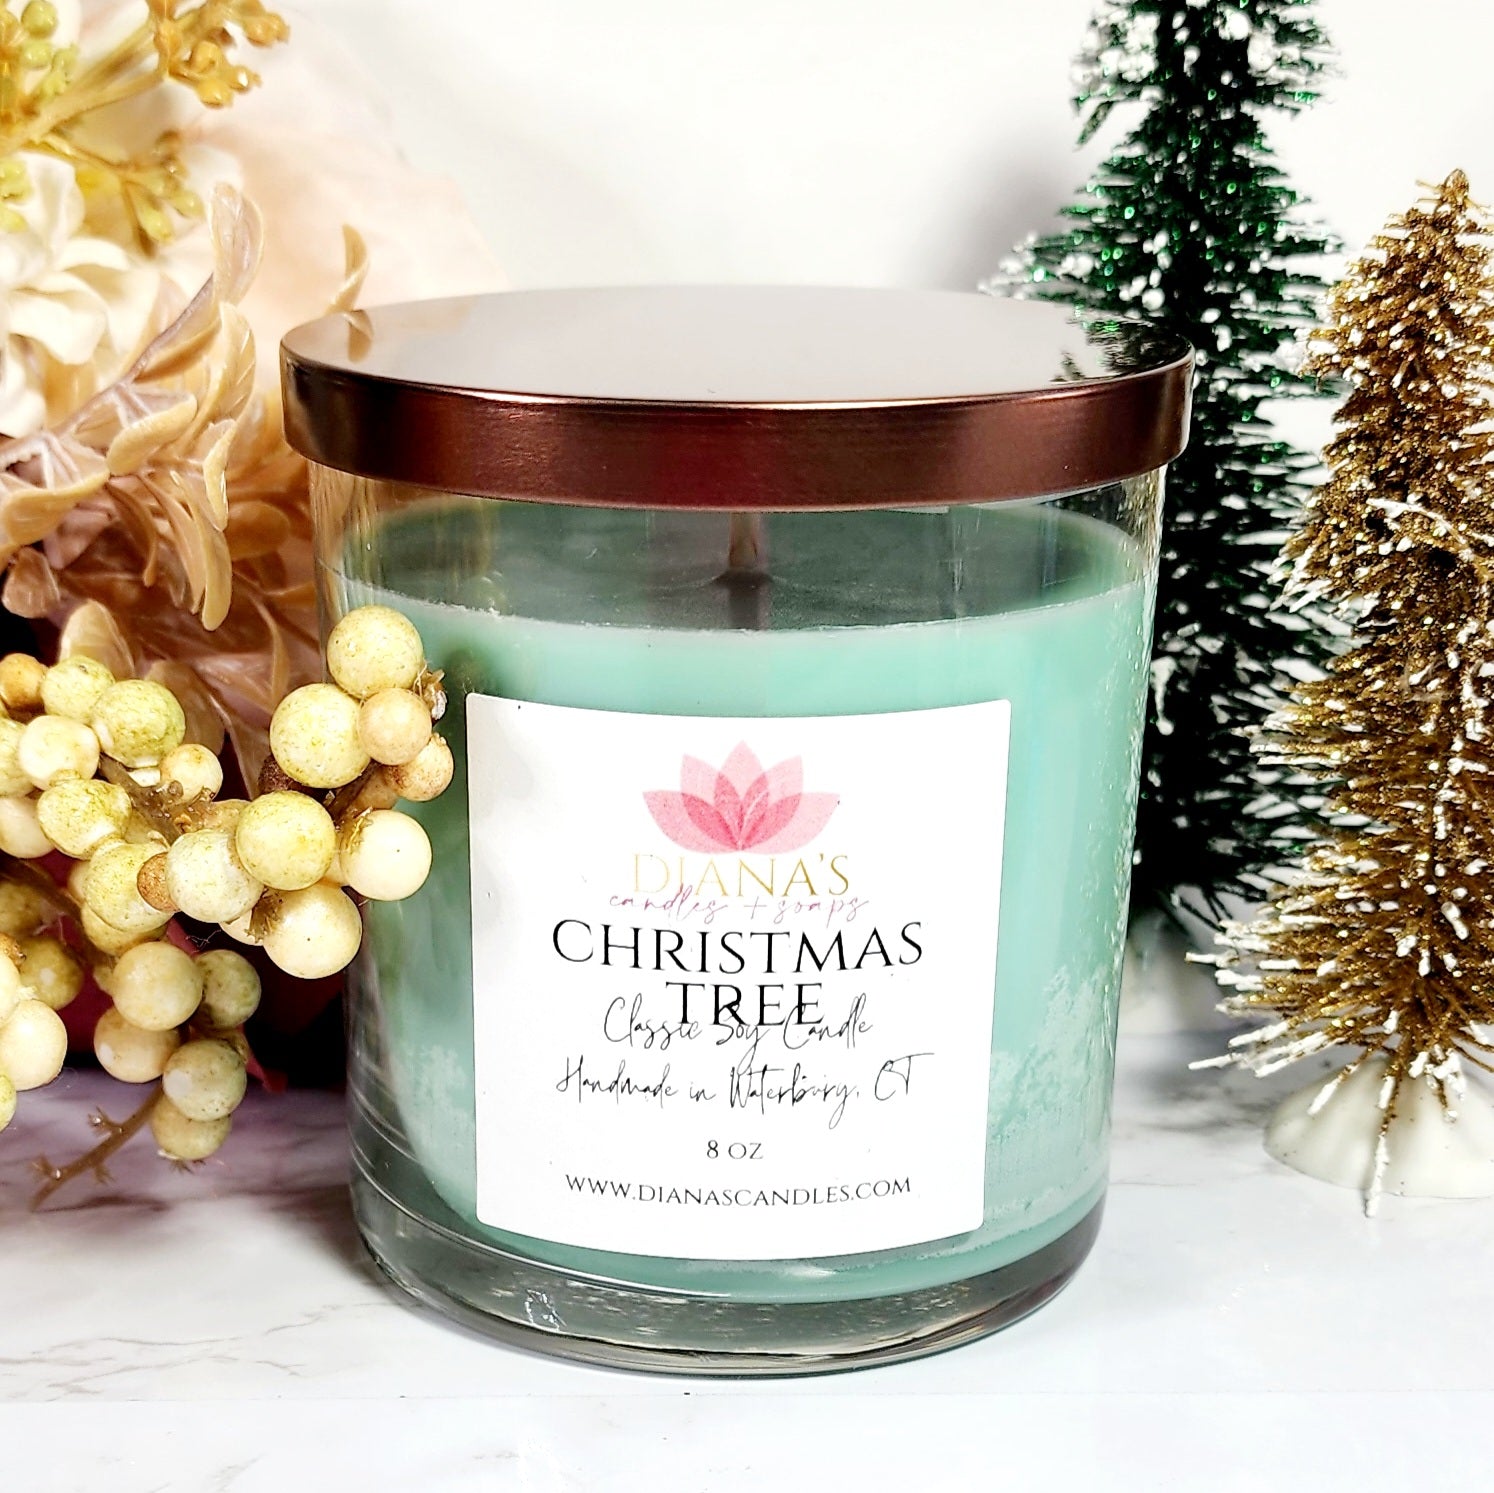 Christmas Tree Candle - Diana's Candles and Soaps 